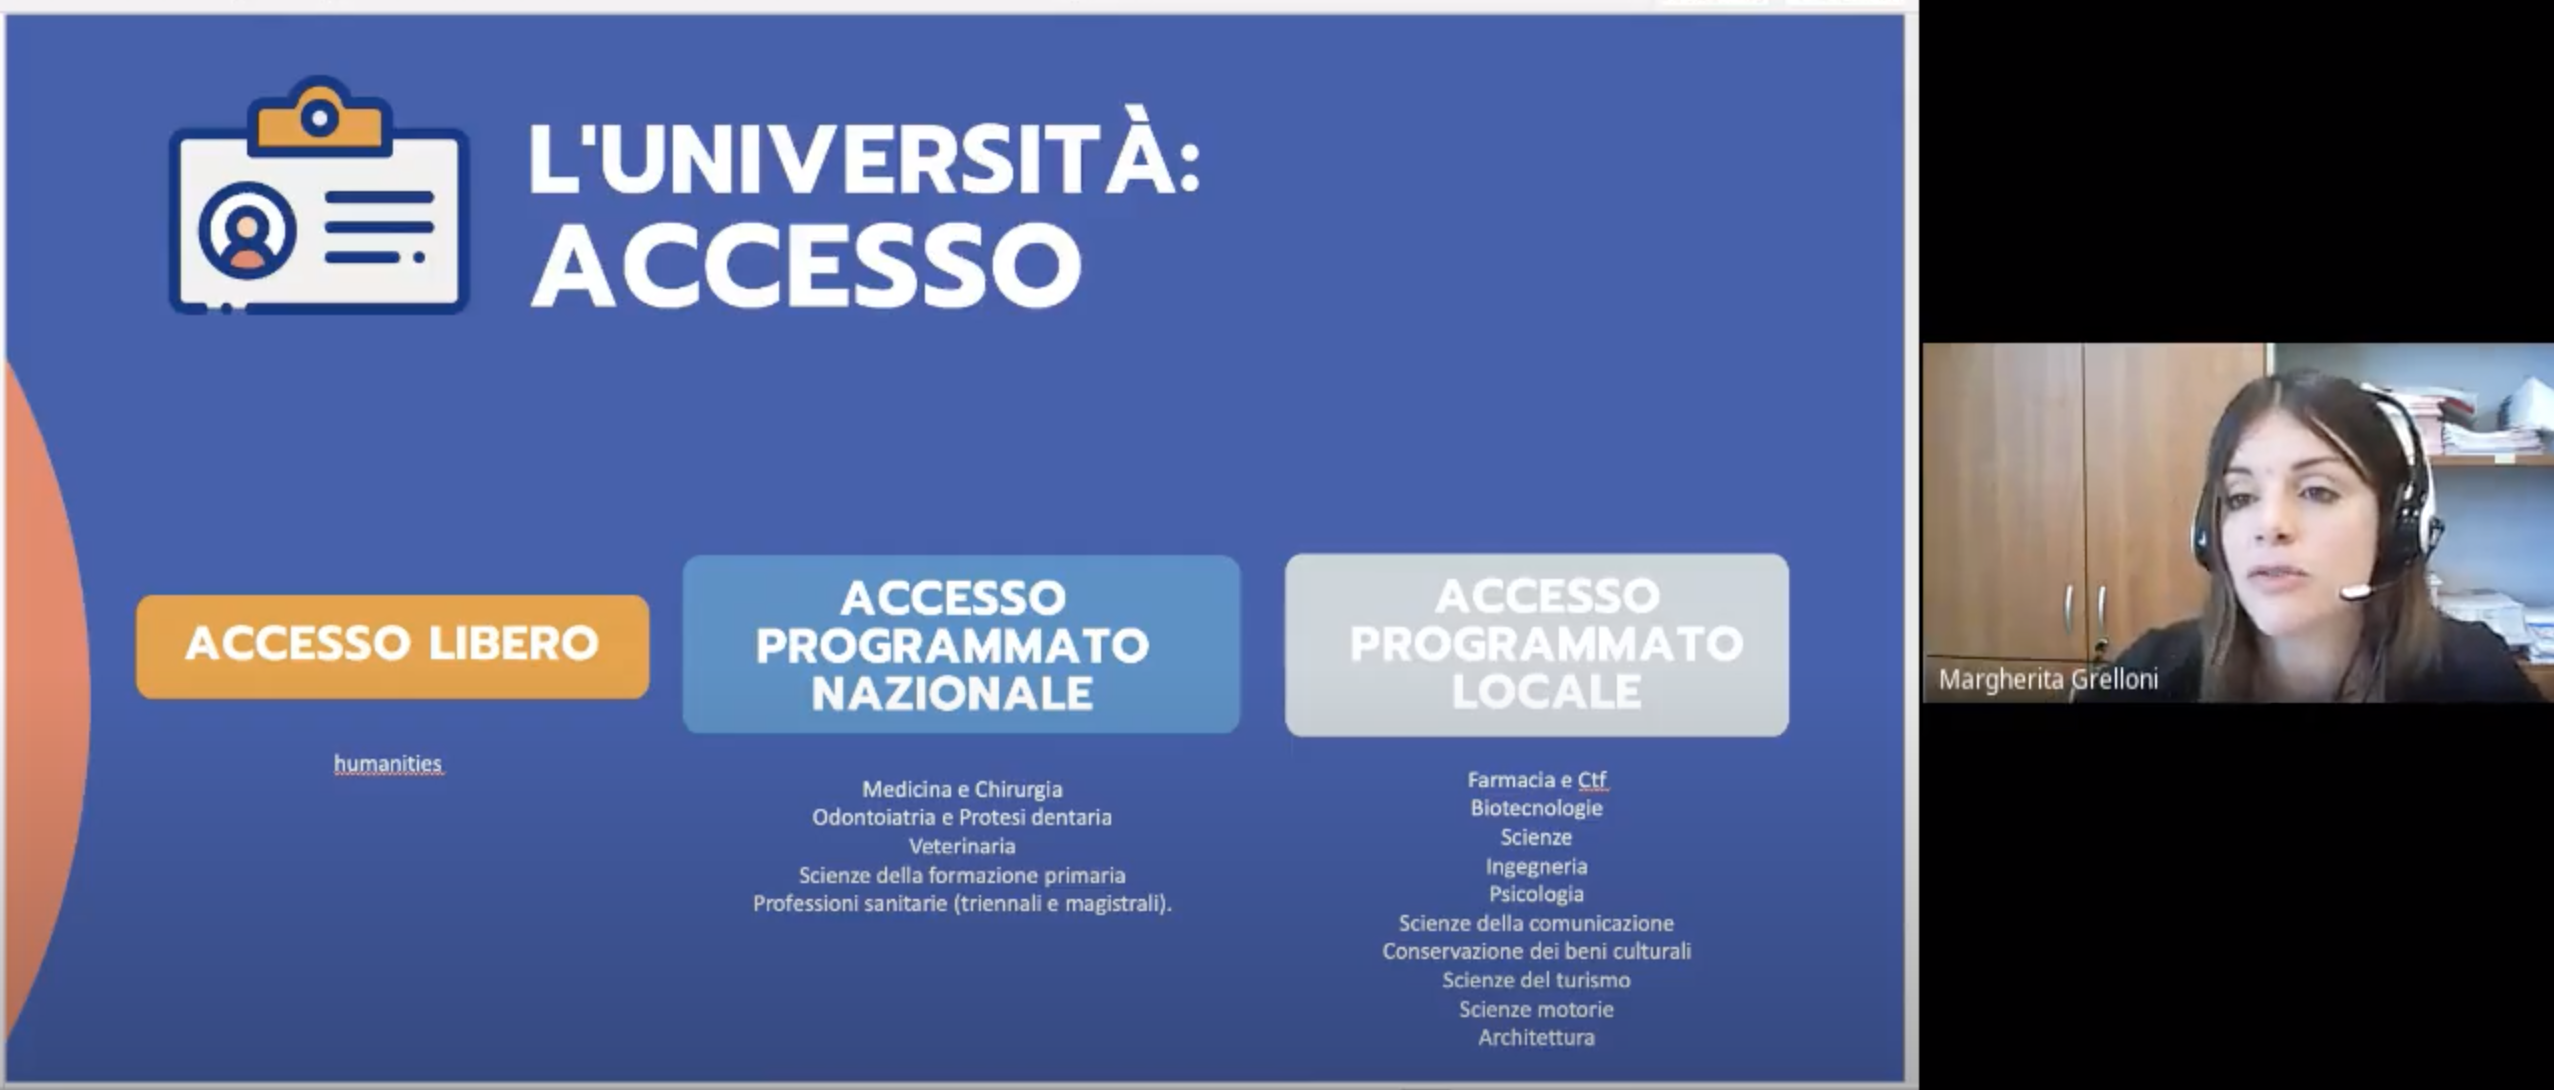 In this pilot,  the career guidance staff from University of Camerino, together with practitioners from Pluriversum and technical assistance from Citynet worked together to map the structure of career guidance web services present on the websites of Italian universities. The comparative work led to prototyping a new website for career guidance activities offered by universities to secondary school students. New formats of career information digital activities were also tested with 4 classes from the Macerata province.